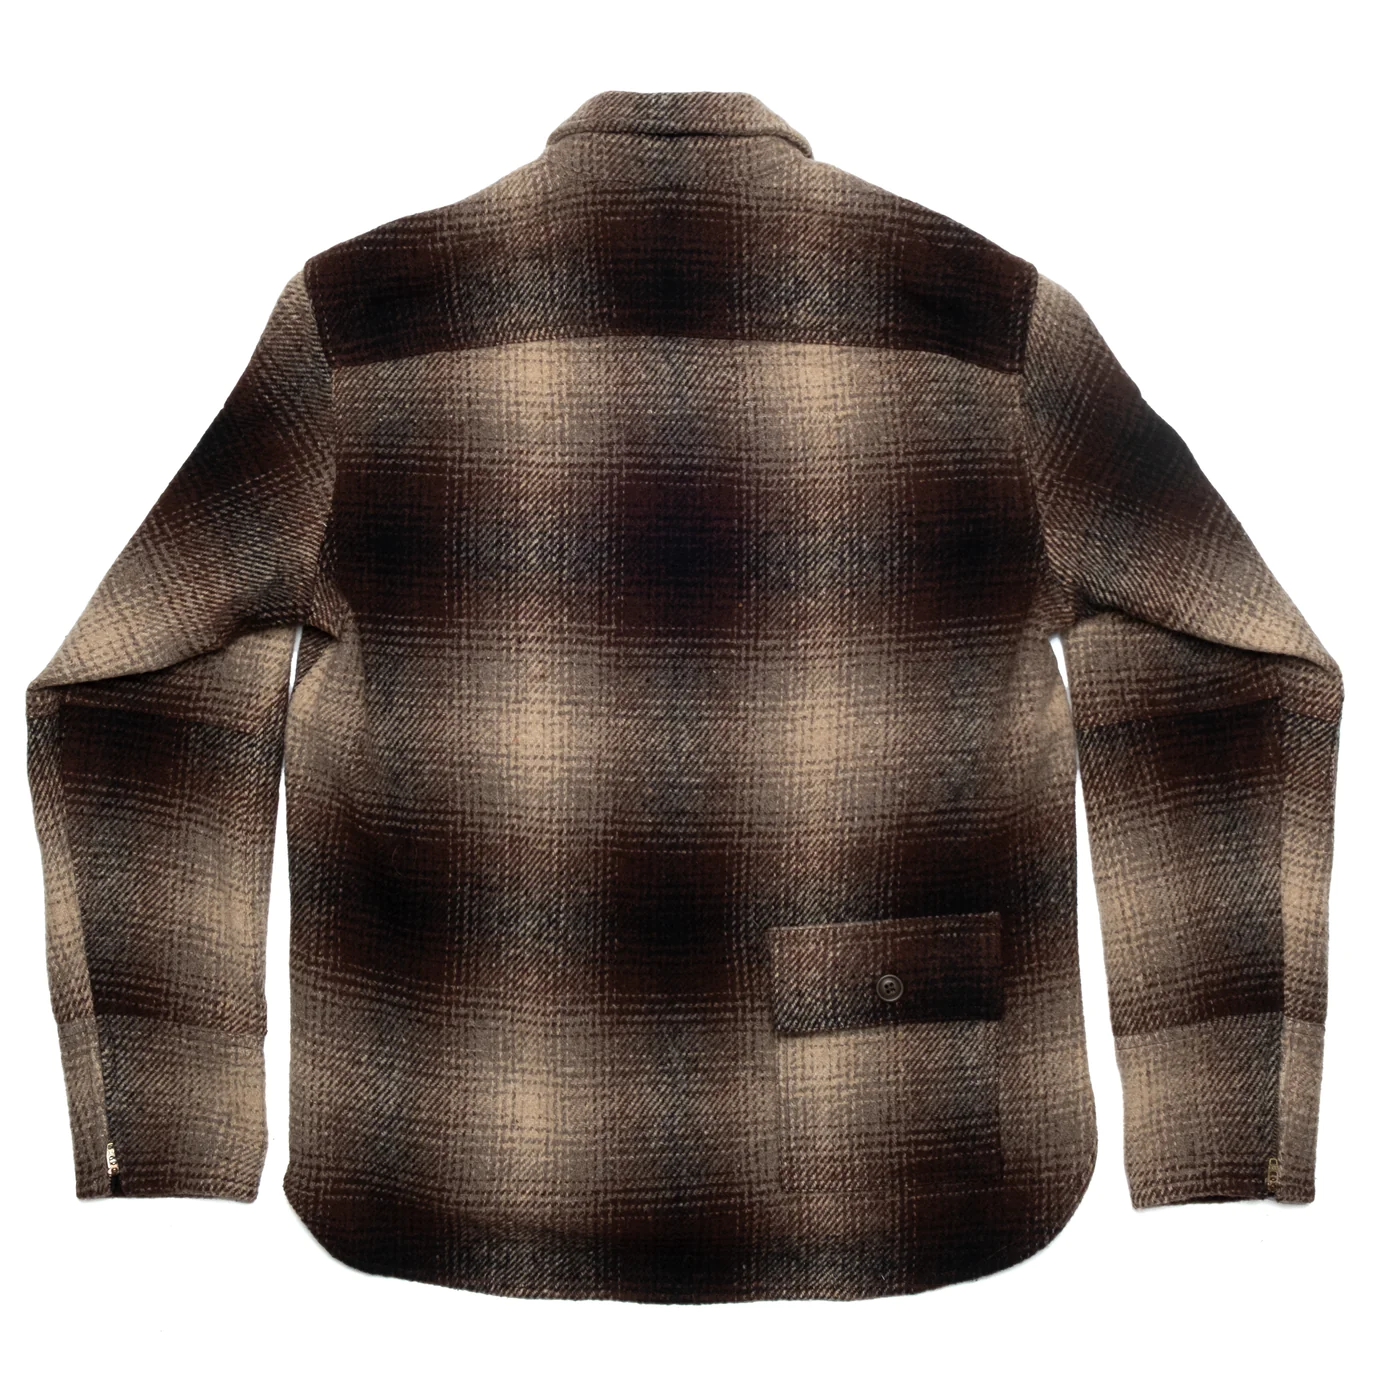 Jane Motorcycle The Mercer Riding Shirt - Wool Plaid Limited Edition